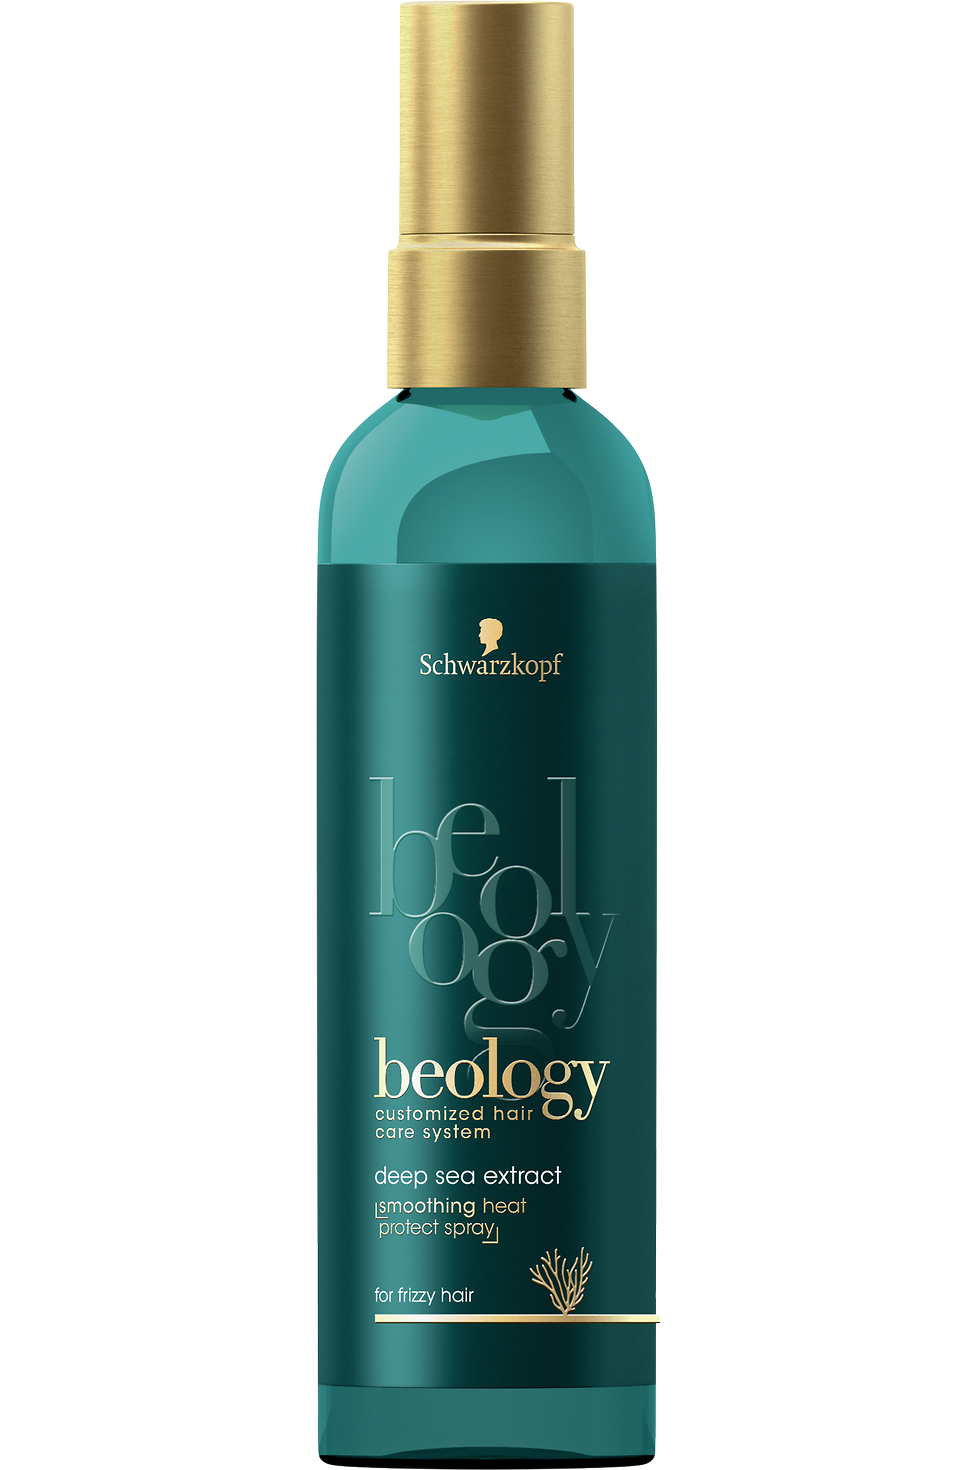 beology Smoothing Heat protection spray